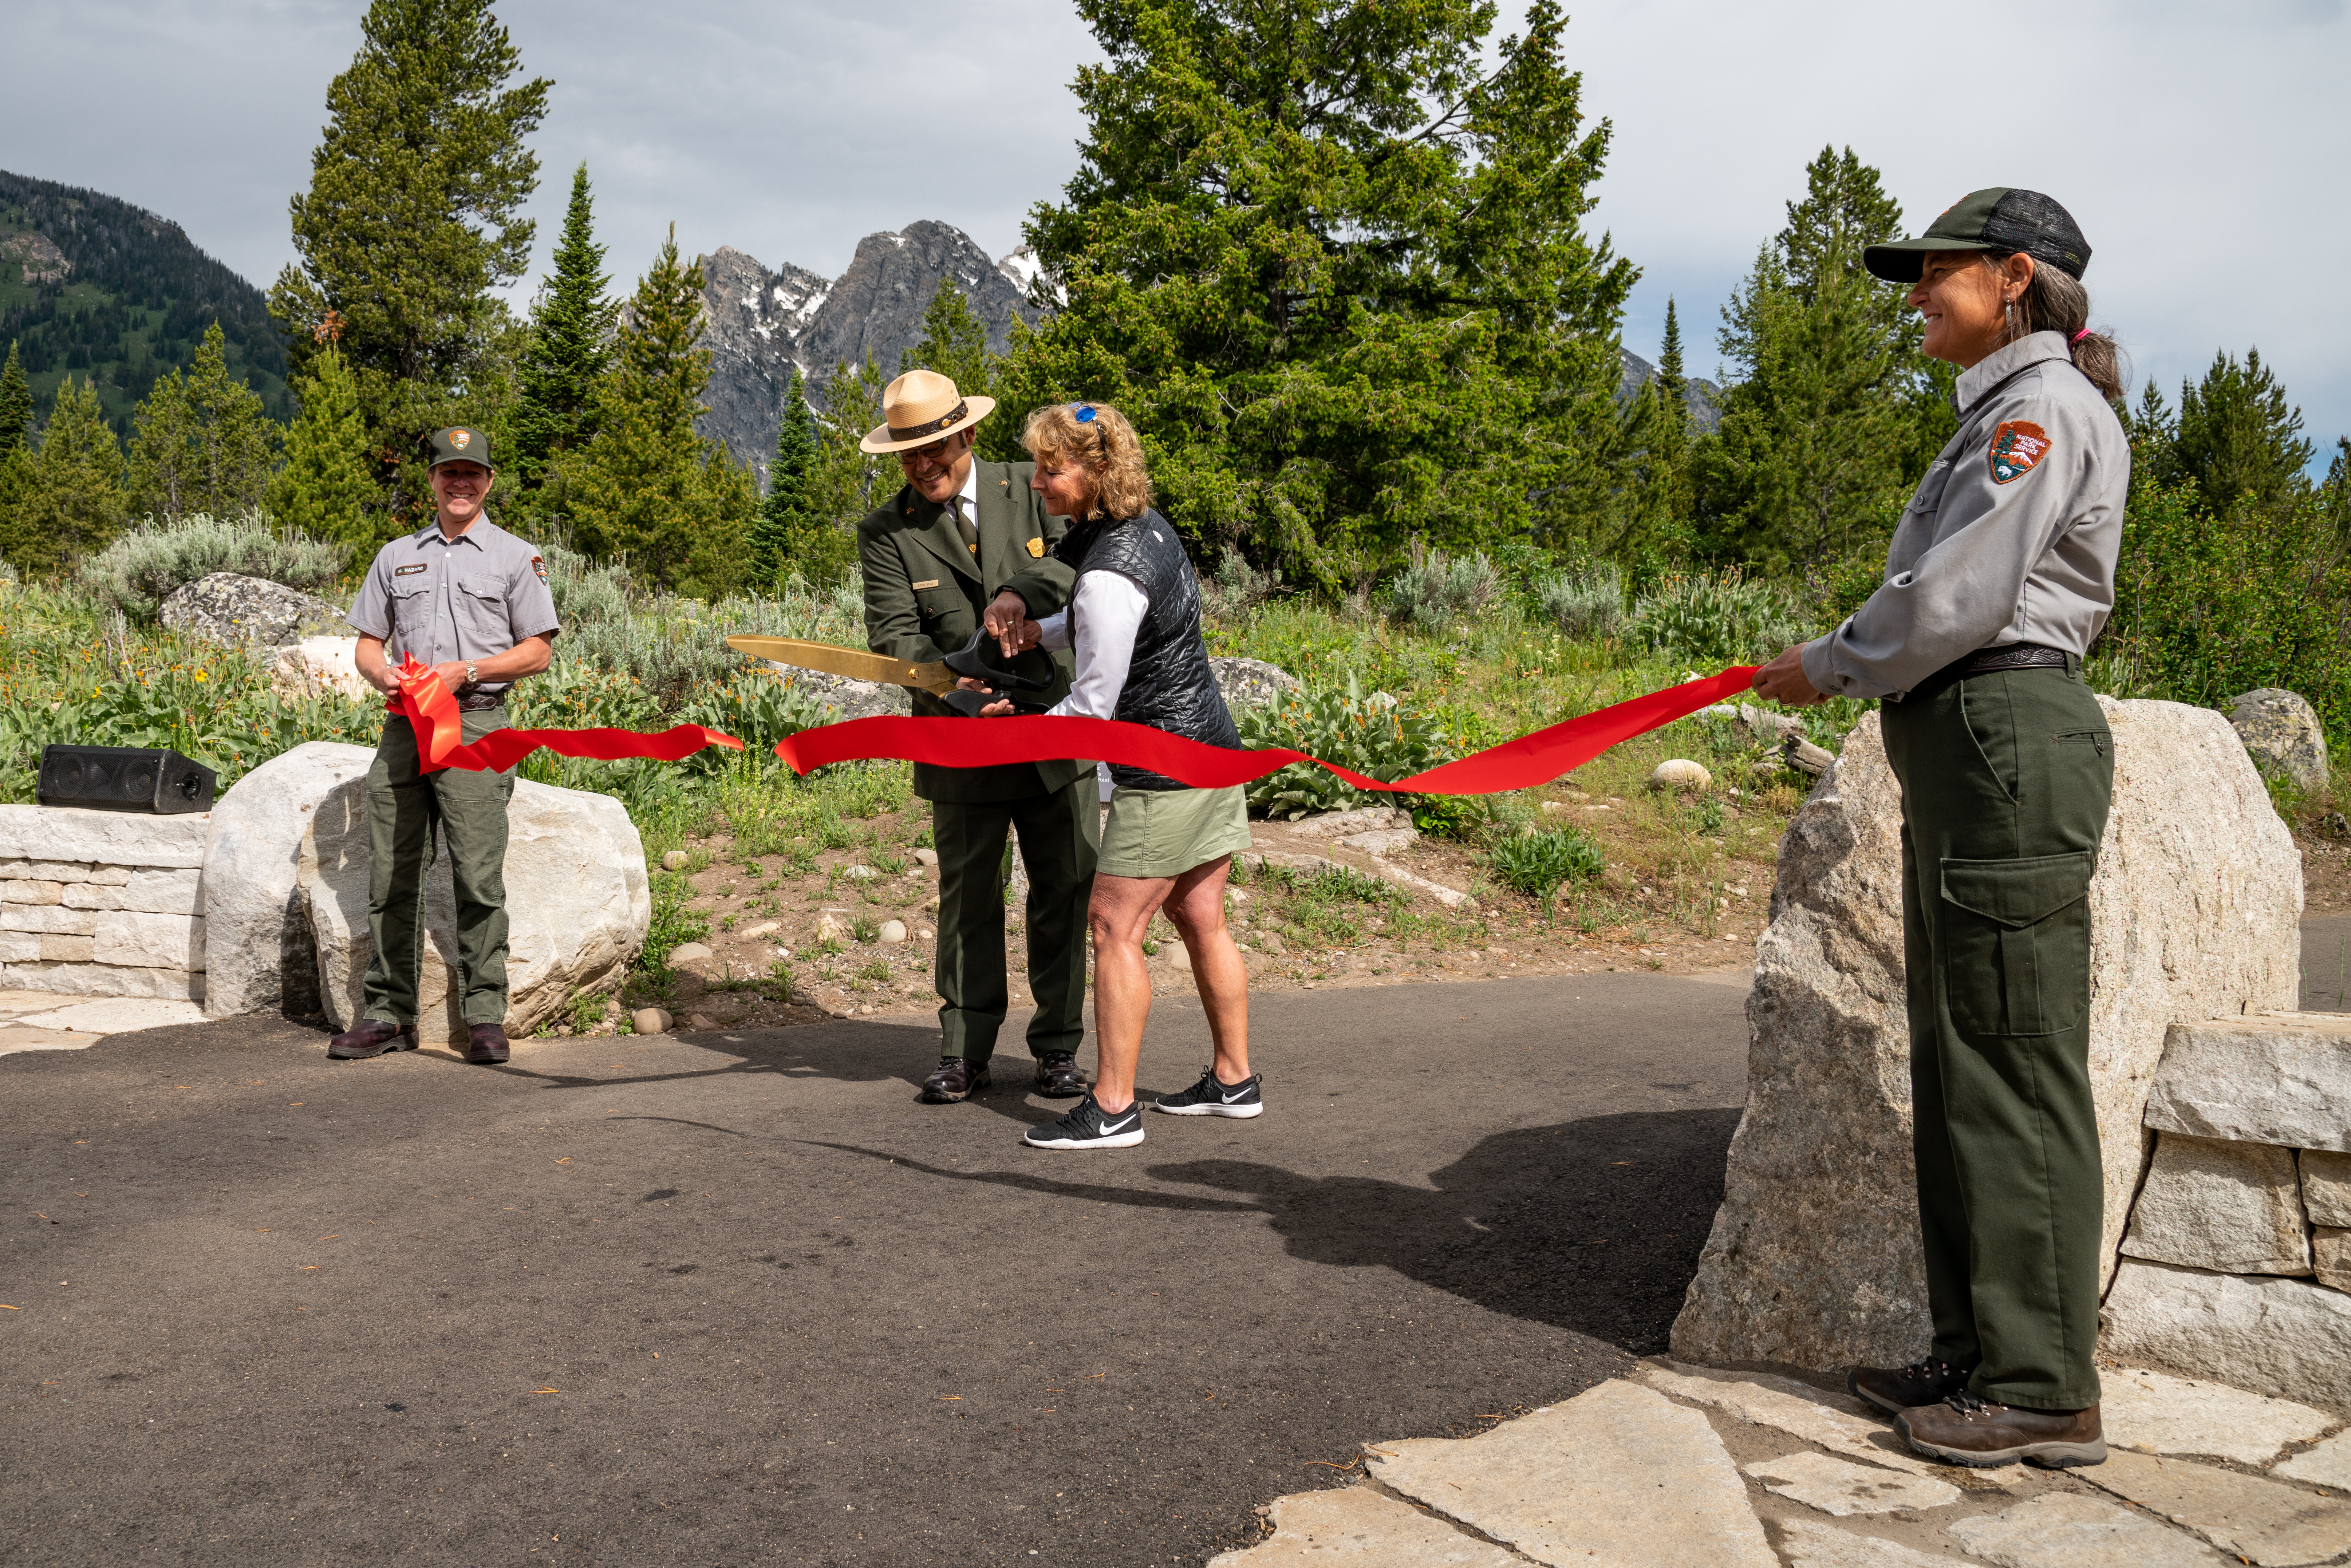 Acting Deputy Director of Operations for the National Park Service David Vela and Grand Teton National Park Foundation President Leslie Mattson cut the ribbon at the Jenny Lake Renewal Project